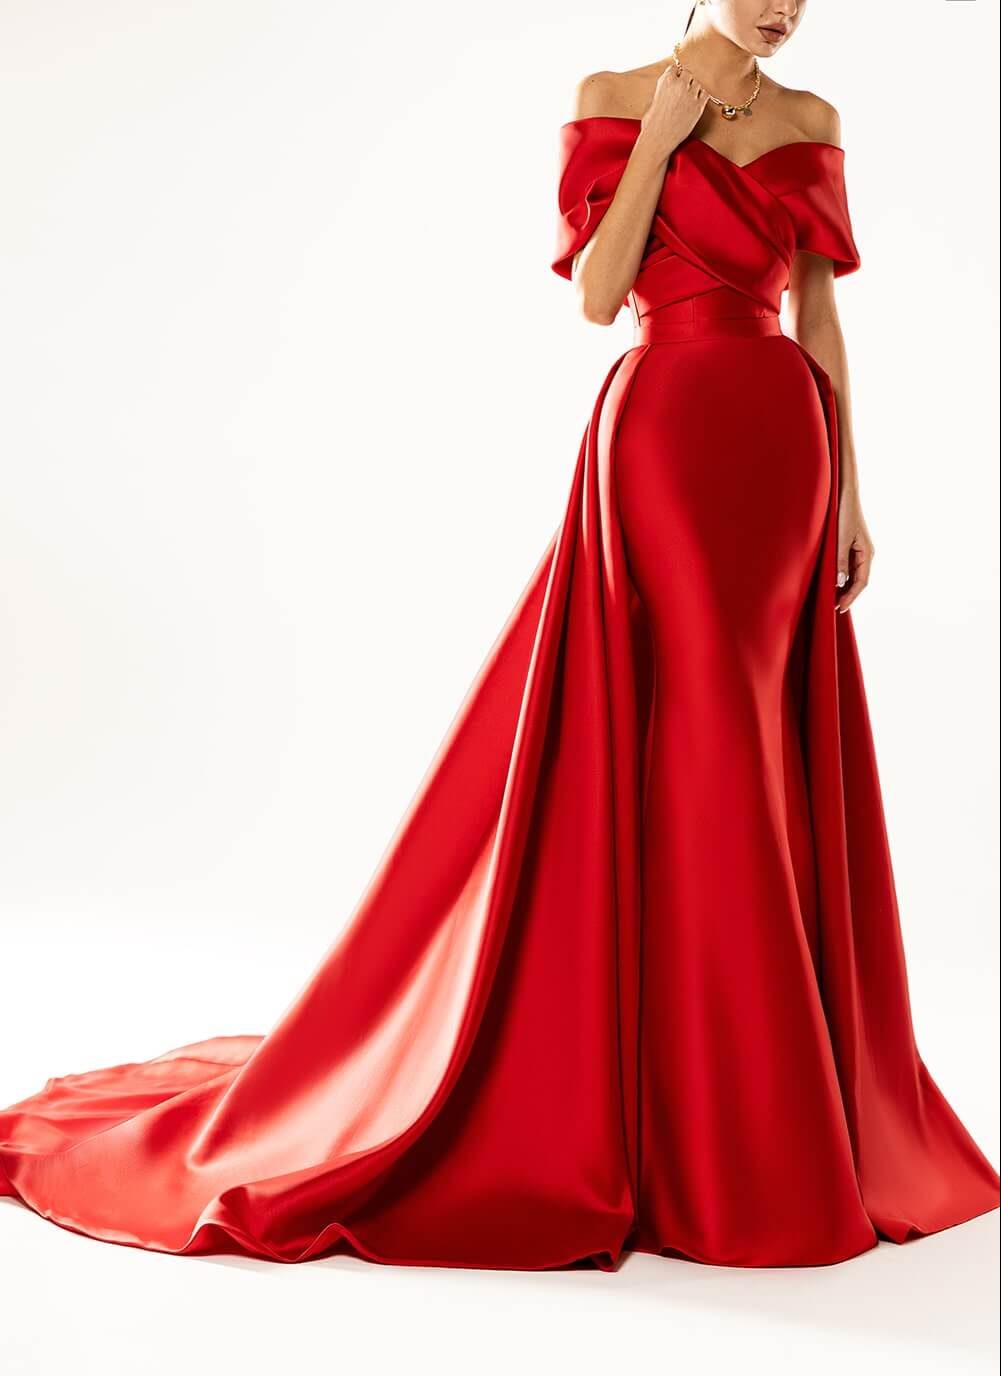 Red gown with overskirt